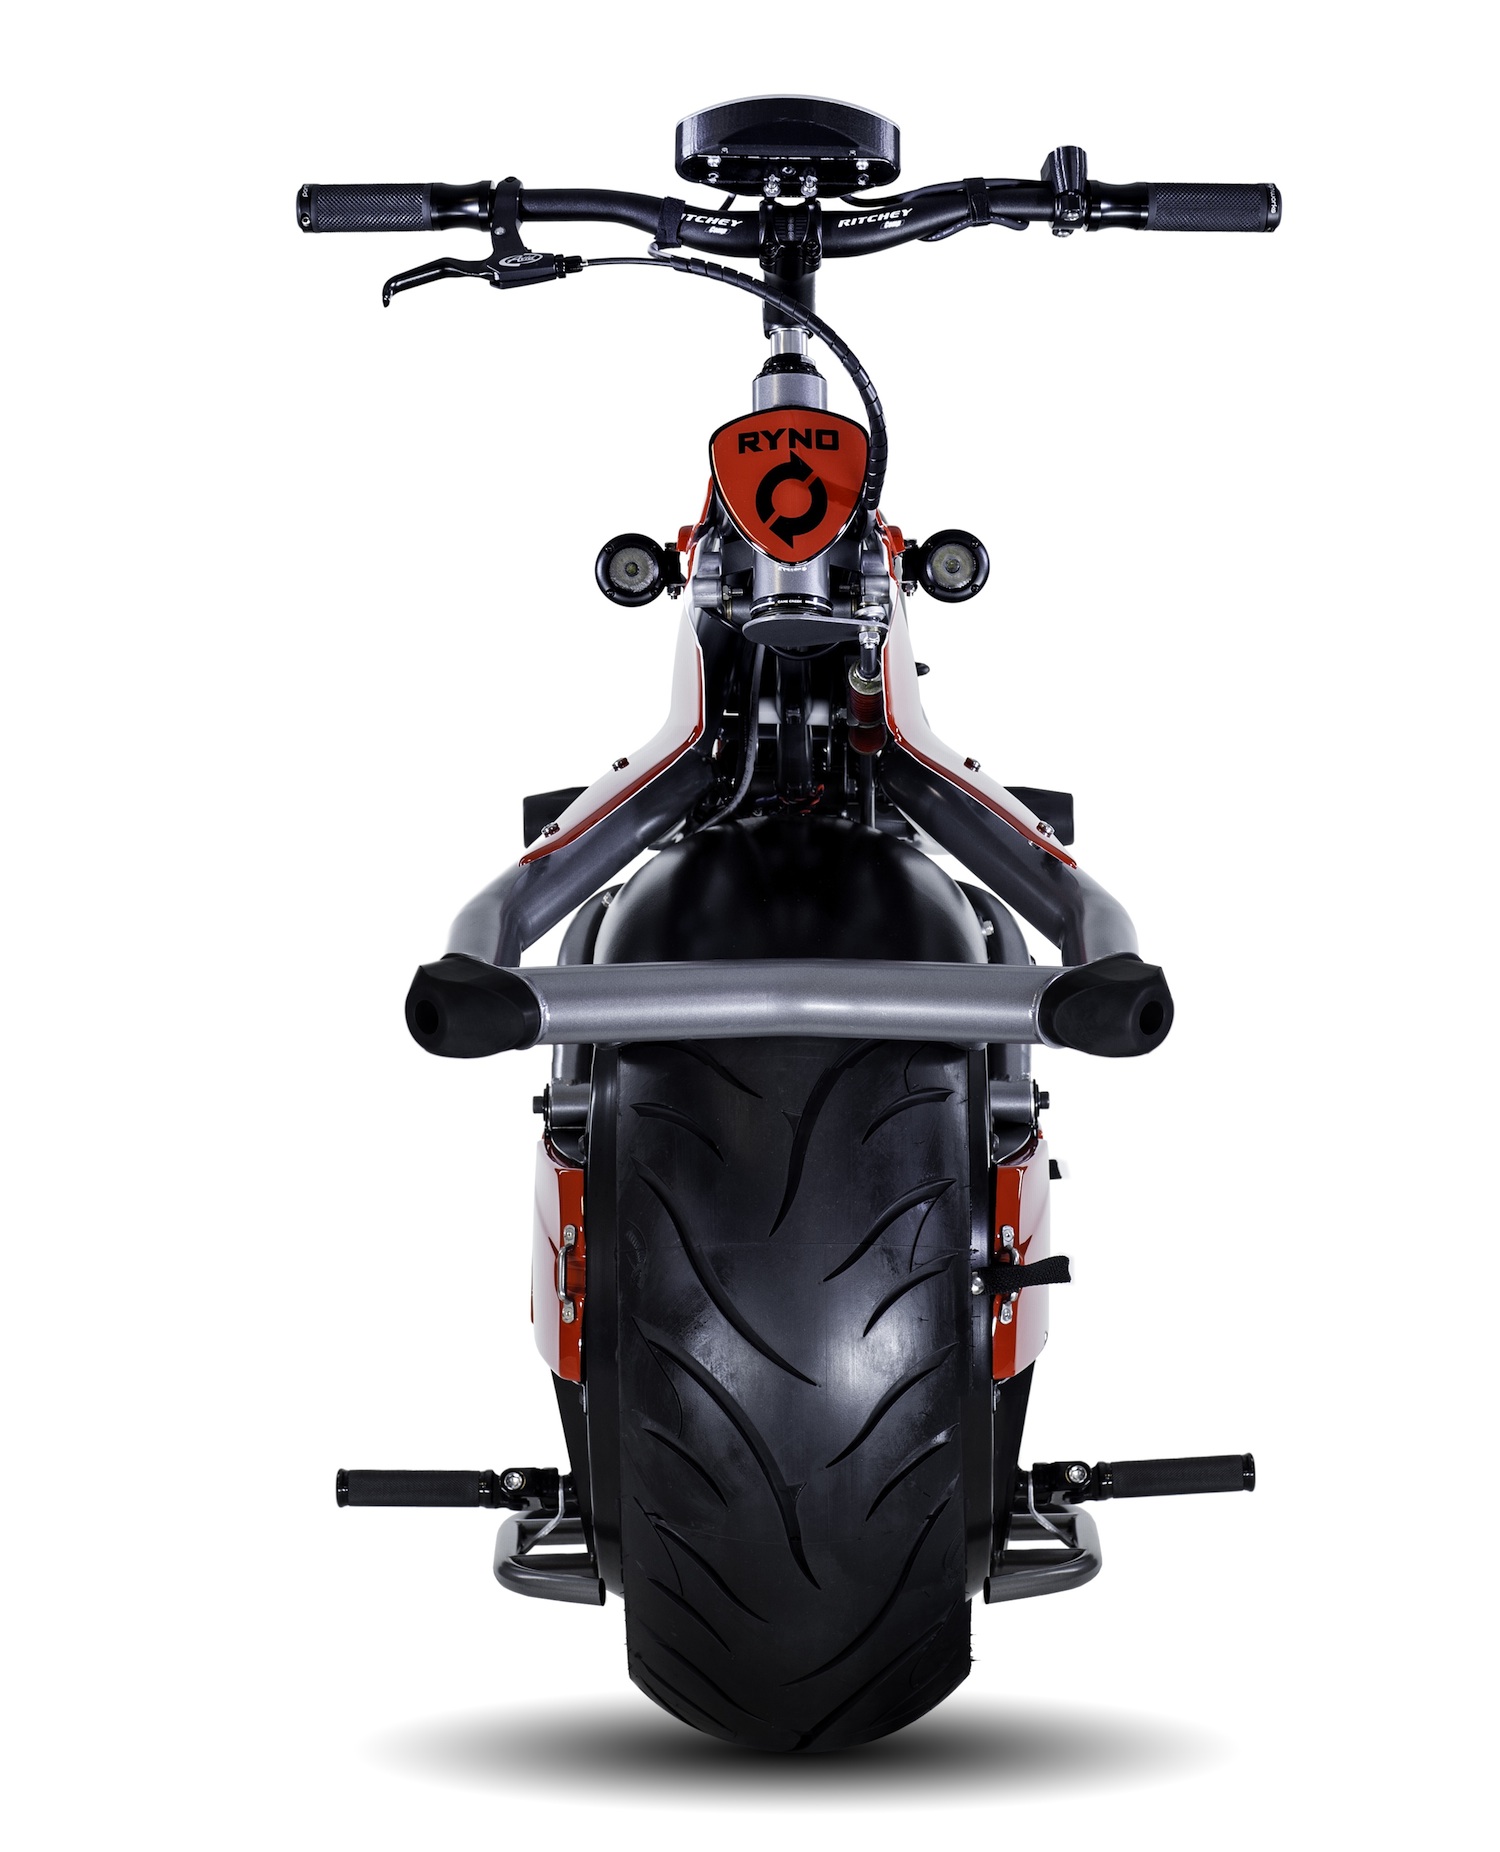 Ryno electric motorcycle